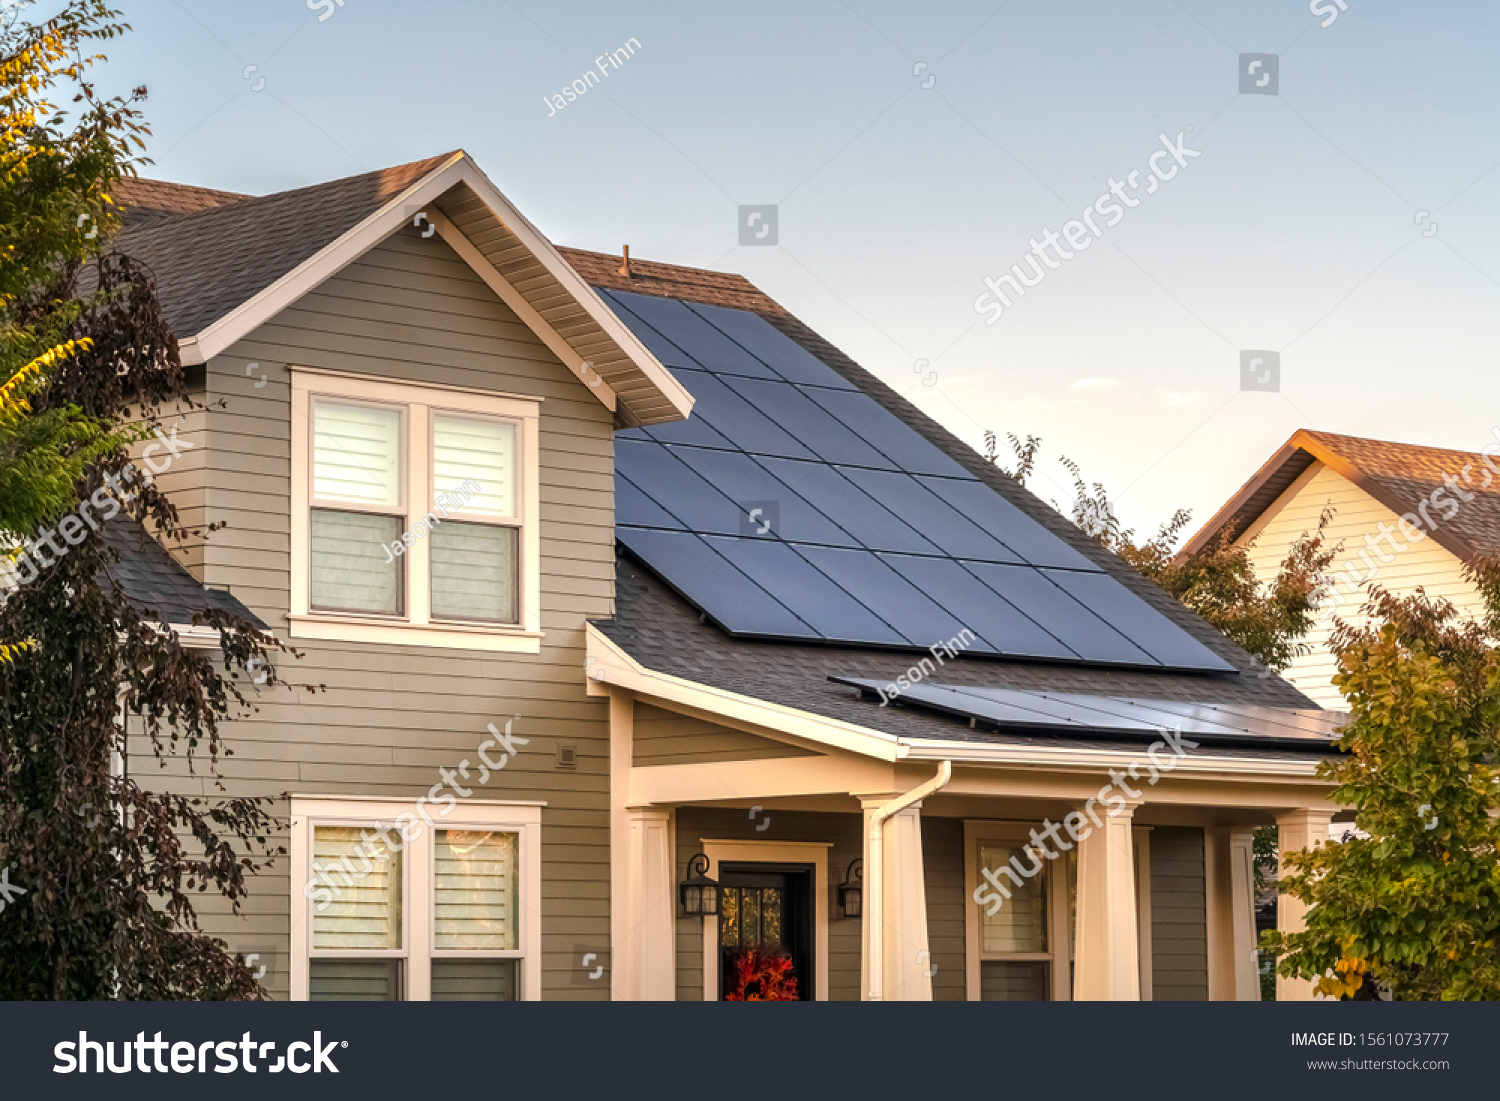 Solar photovoltaic panels on a house roof #1561073777